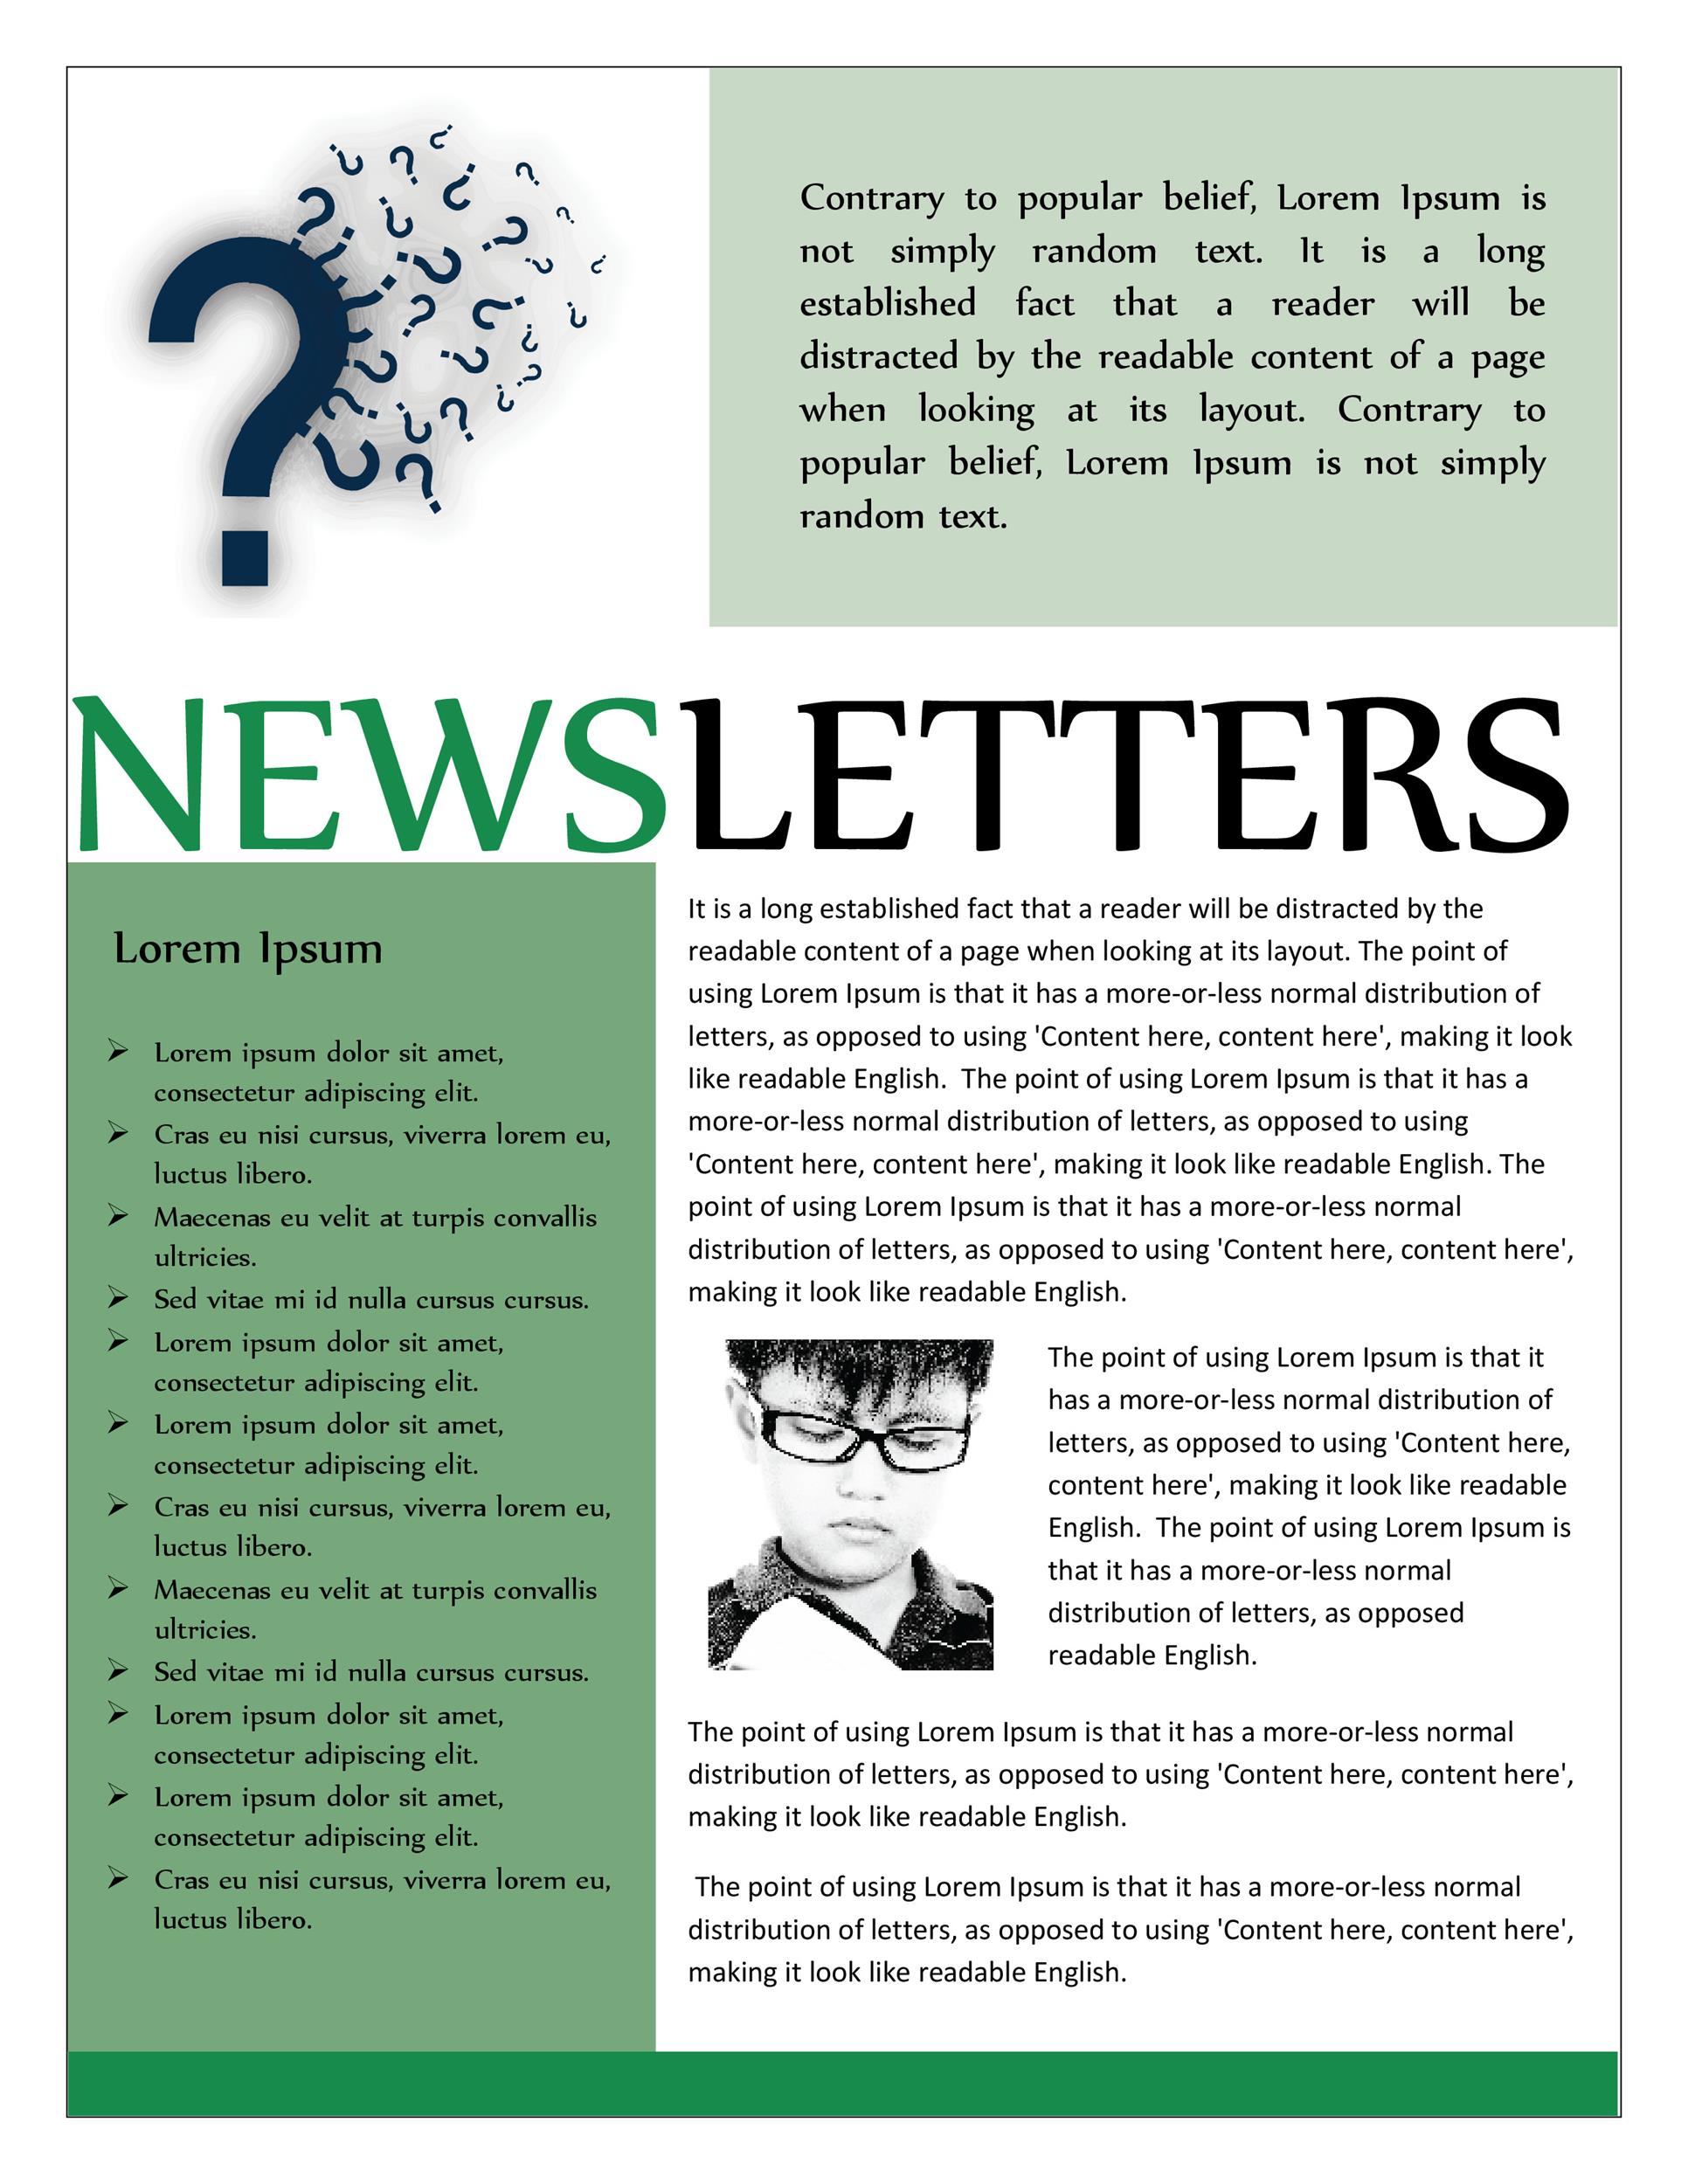 essay about newsletter